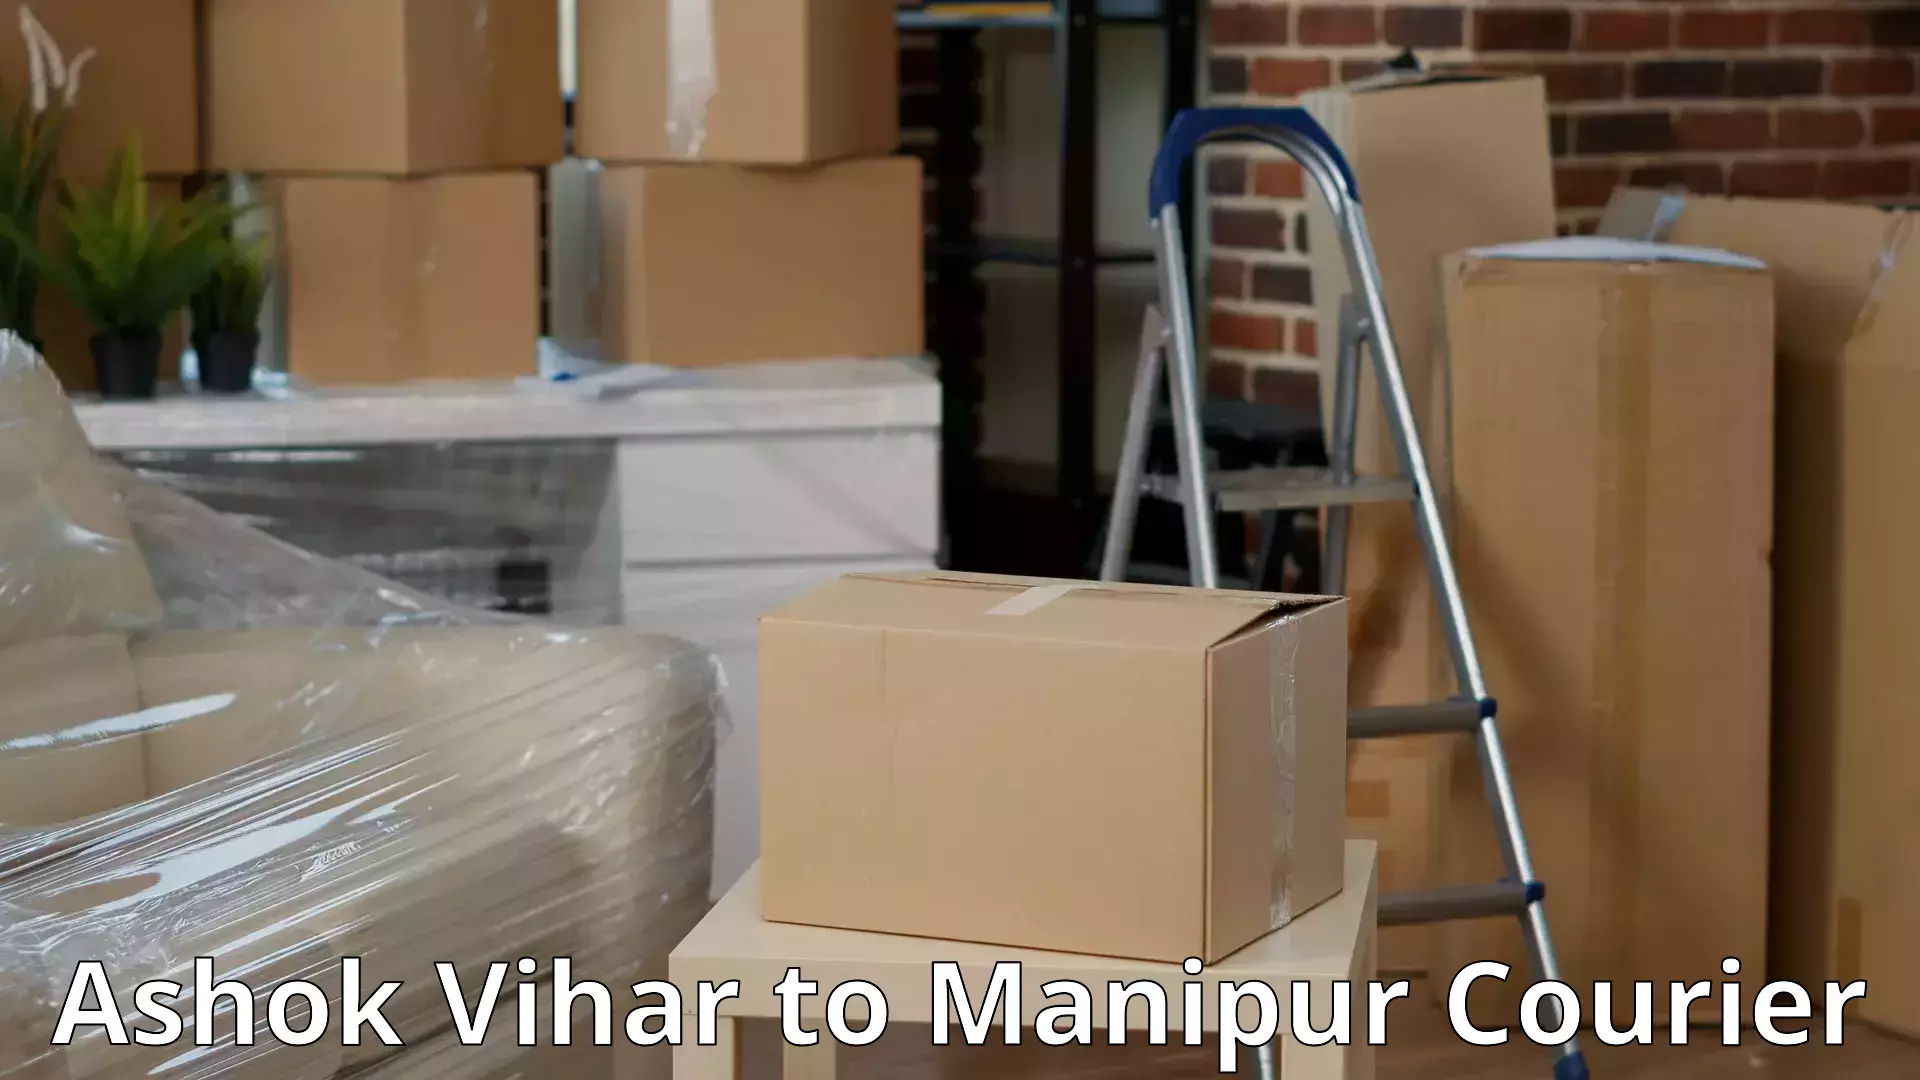 Reliable relocation services in Ashok Vihar to Chandel